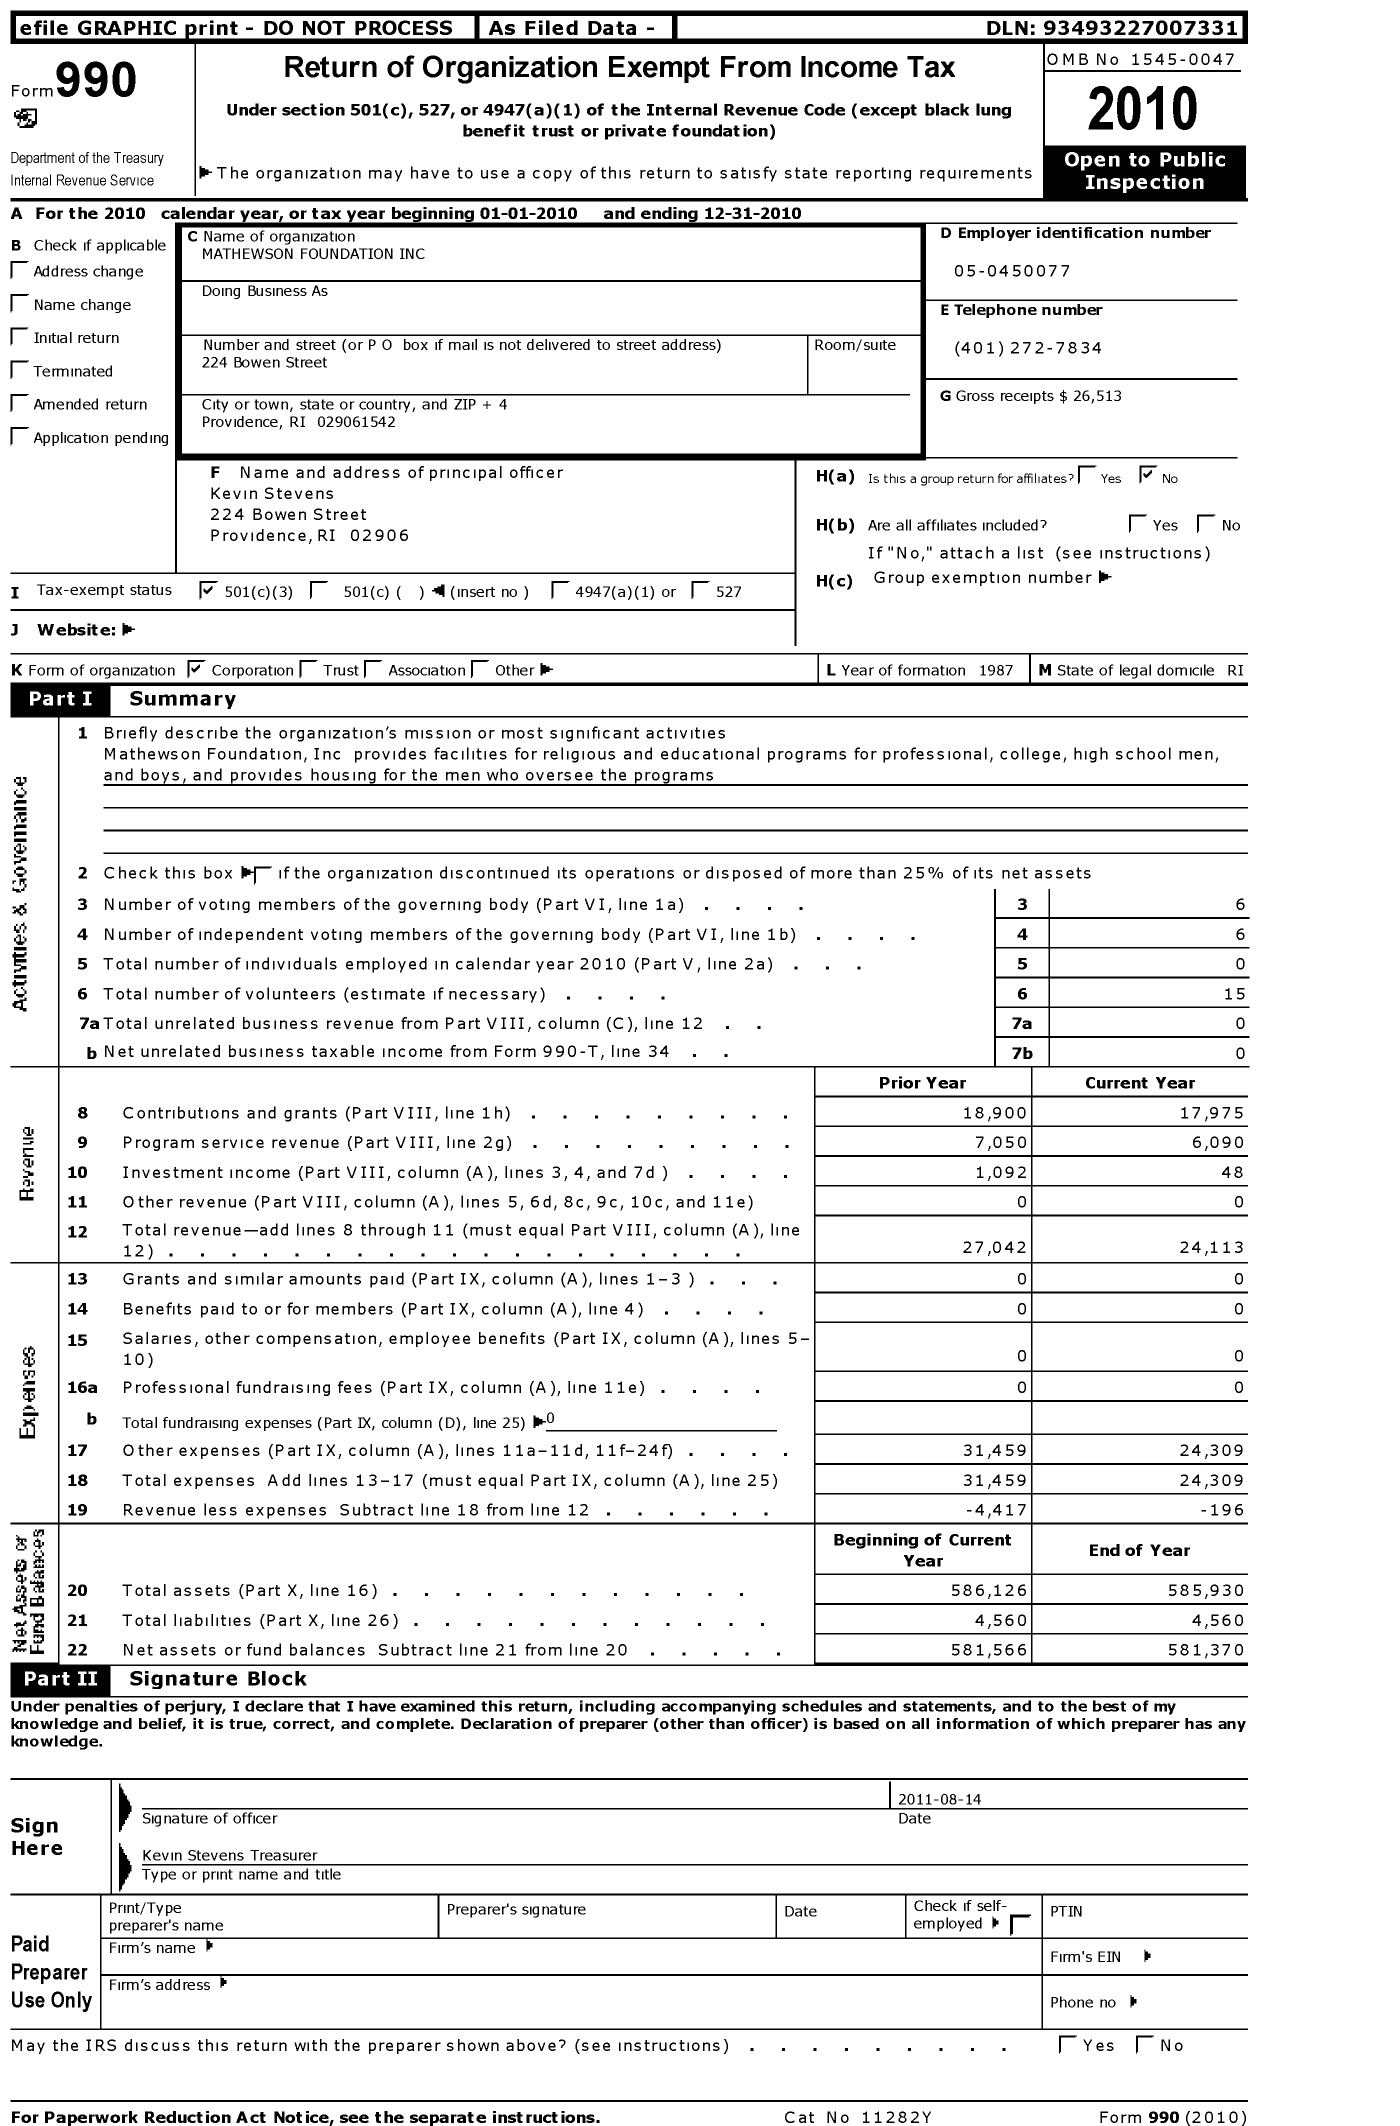 Image of first page of 2010 Form 990 for Mathewson Foundation